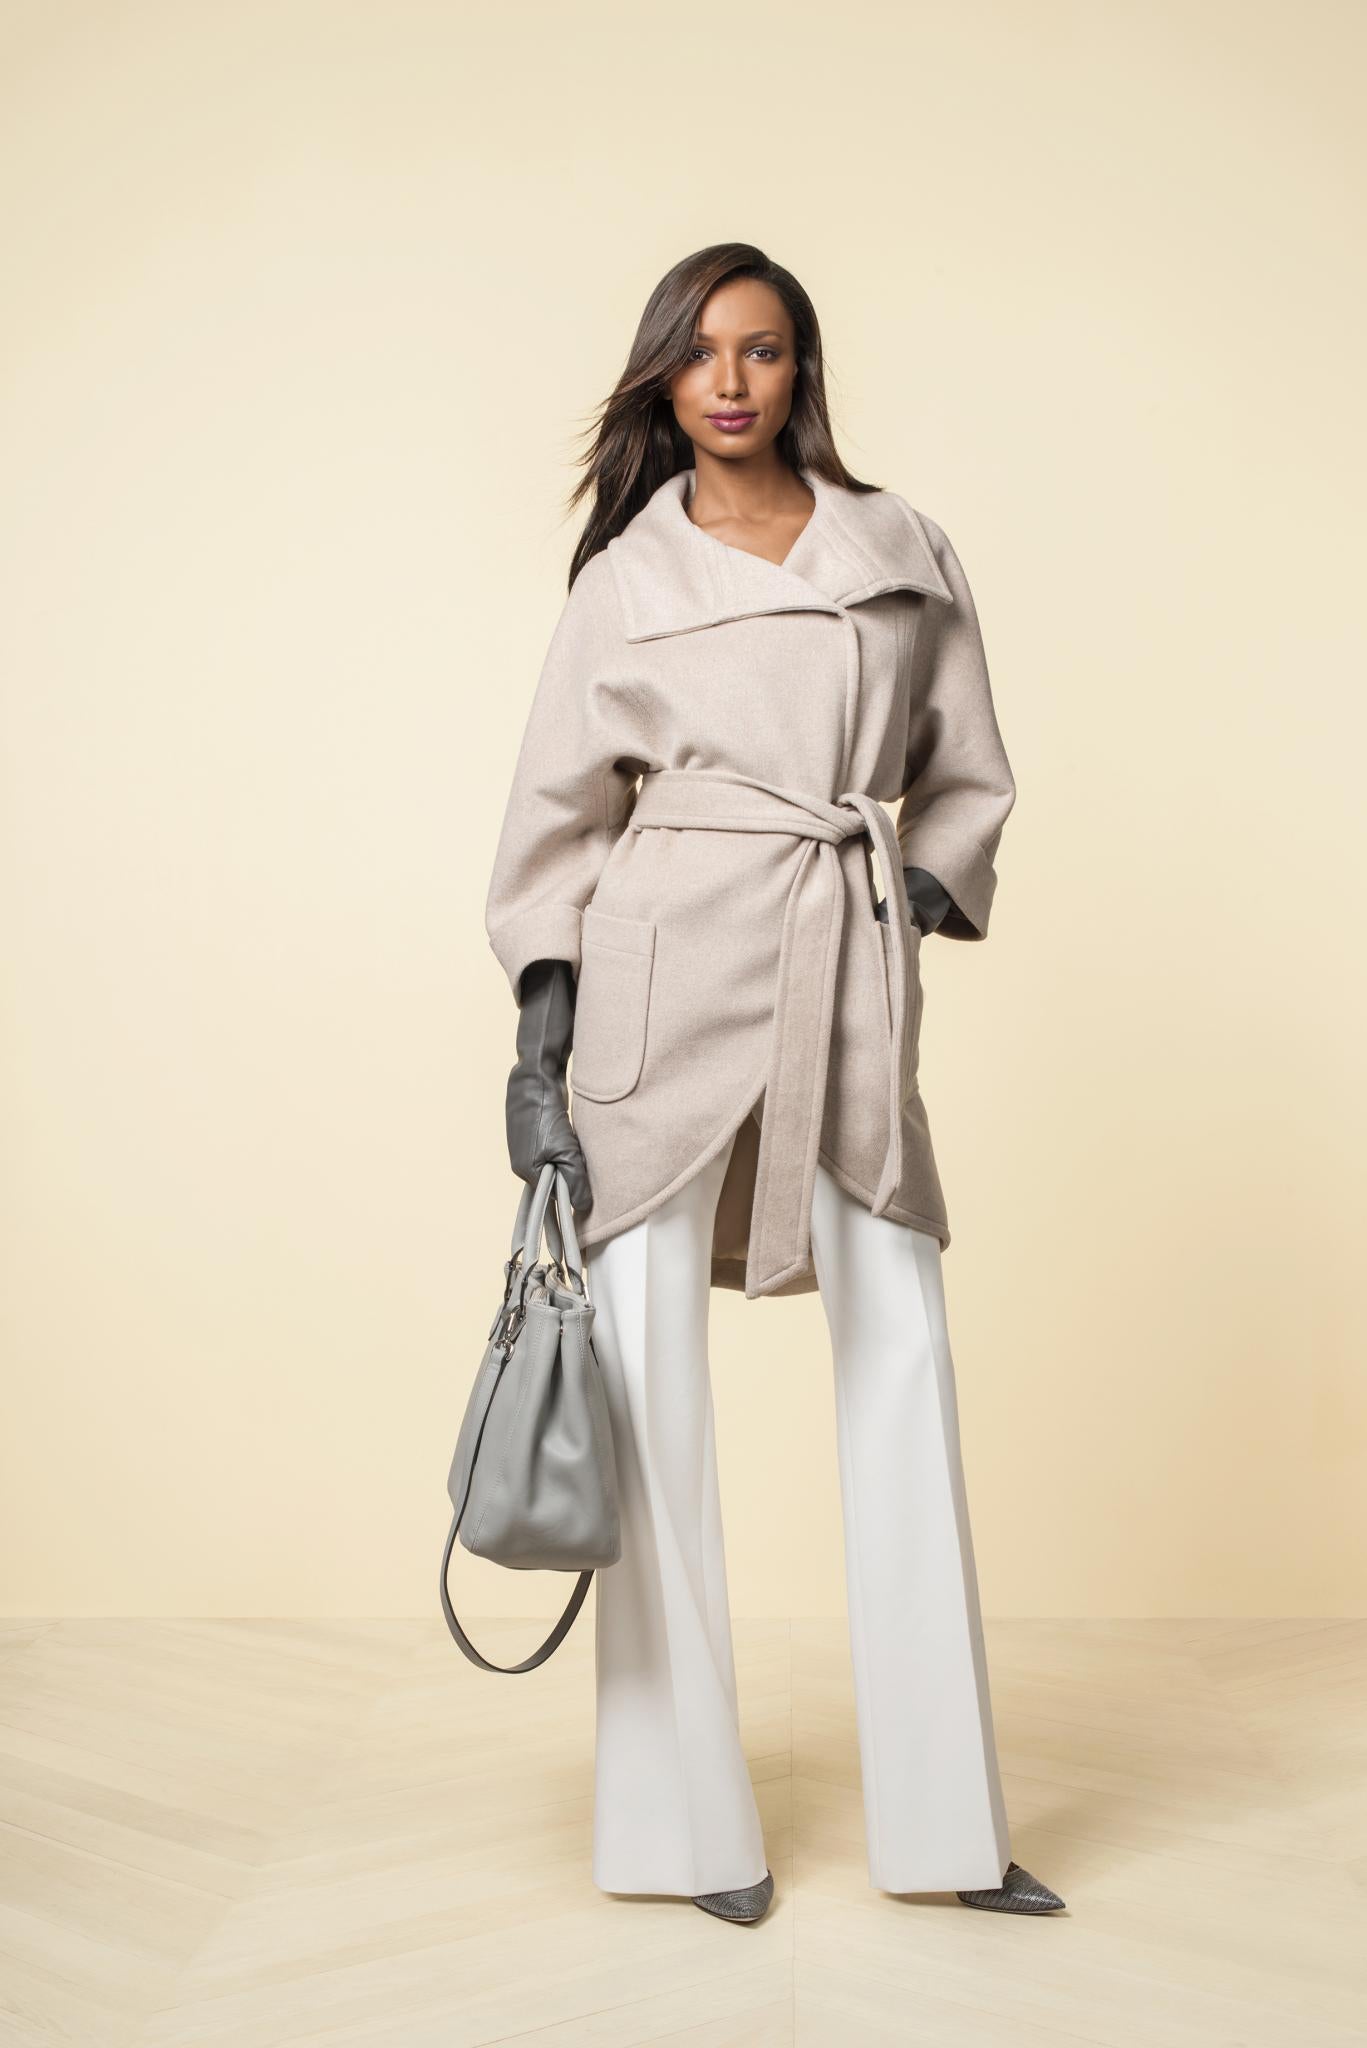 The Limited's Olivia Pope Inspired Collection